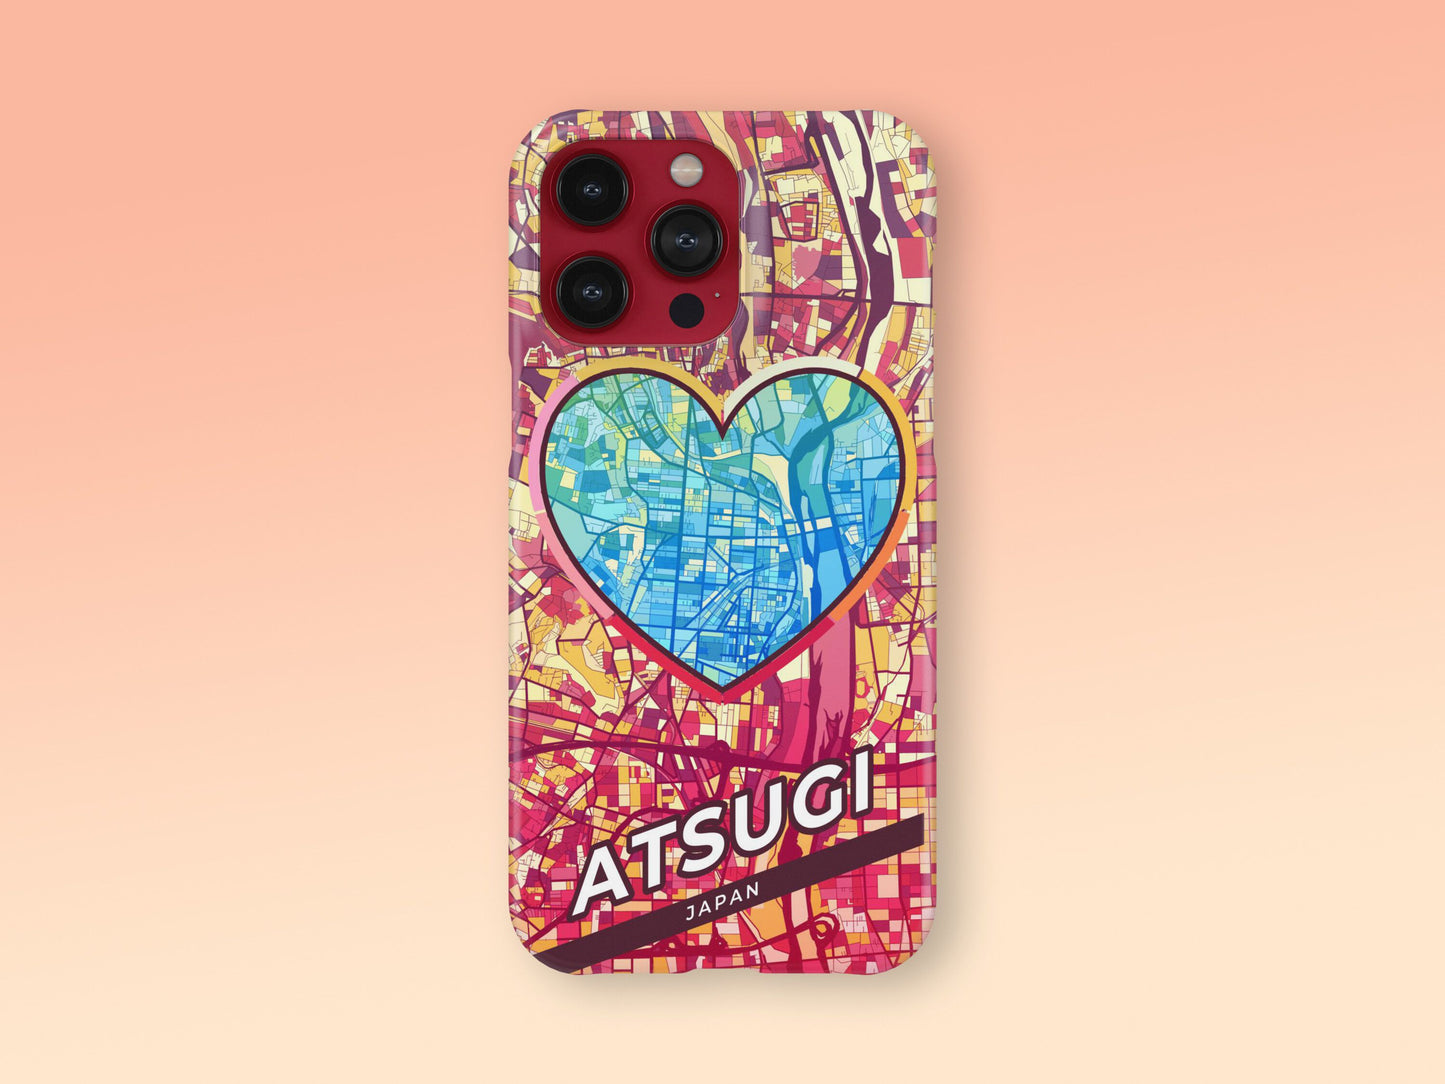 Atsugi Japan slim phone case with colorful icon. Birthday, wedding or housewarming gift. Couple match cases. 2